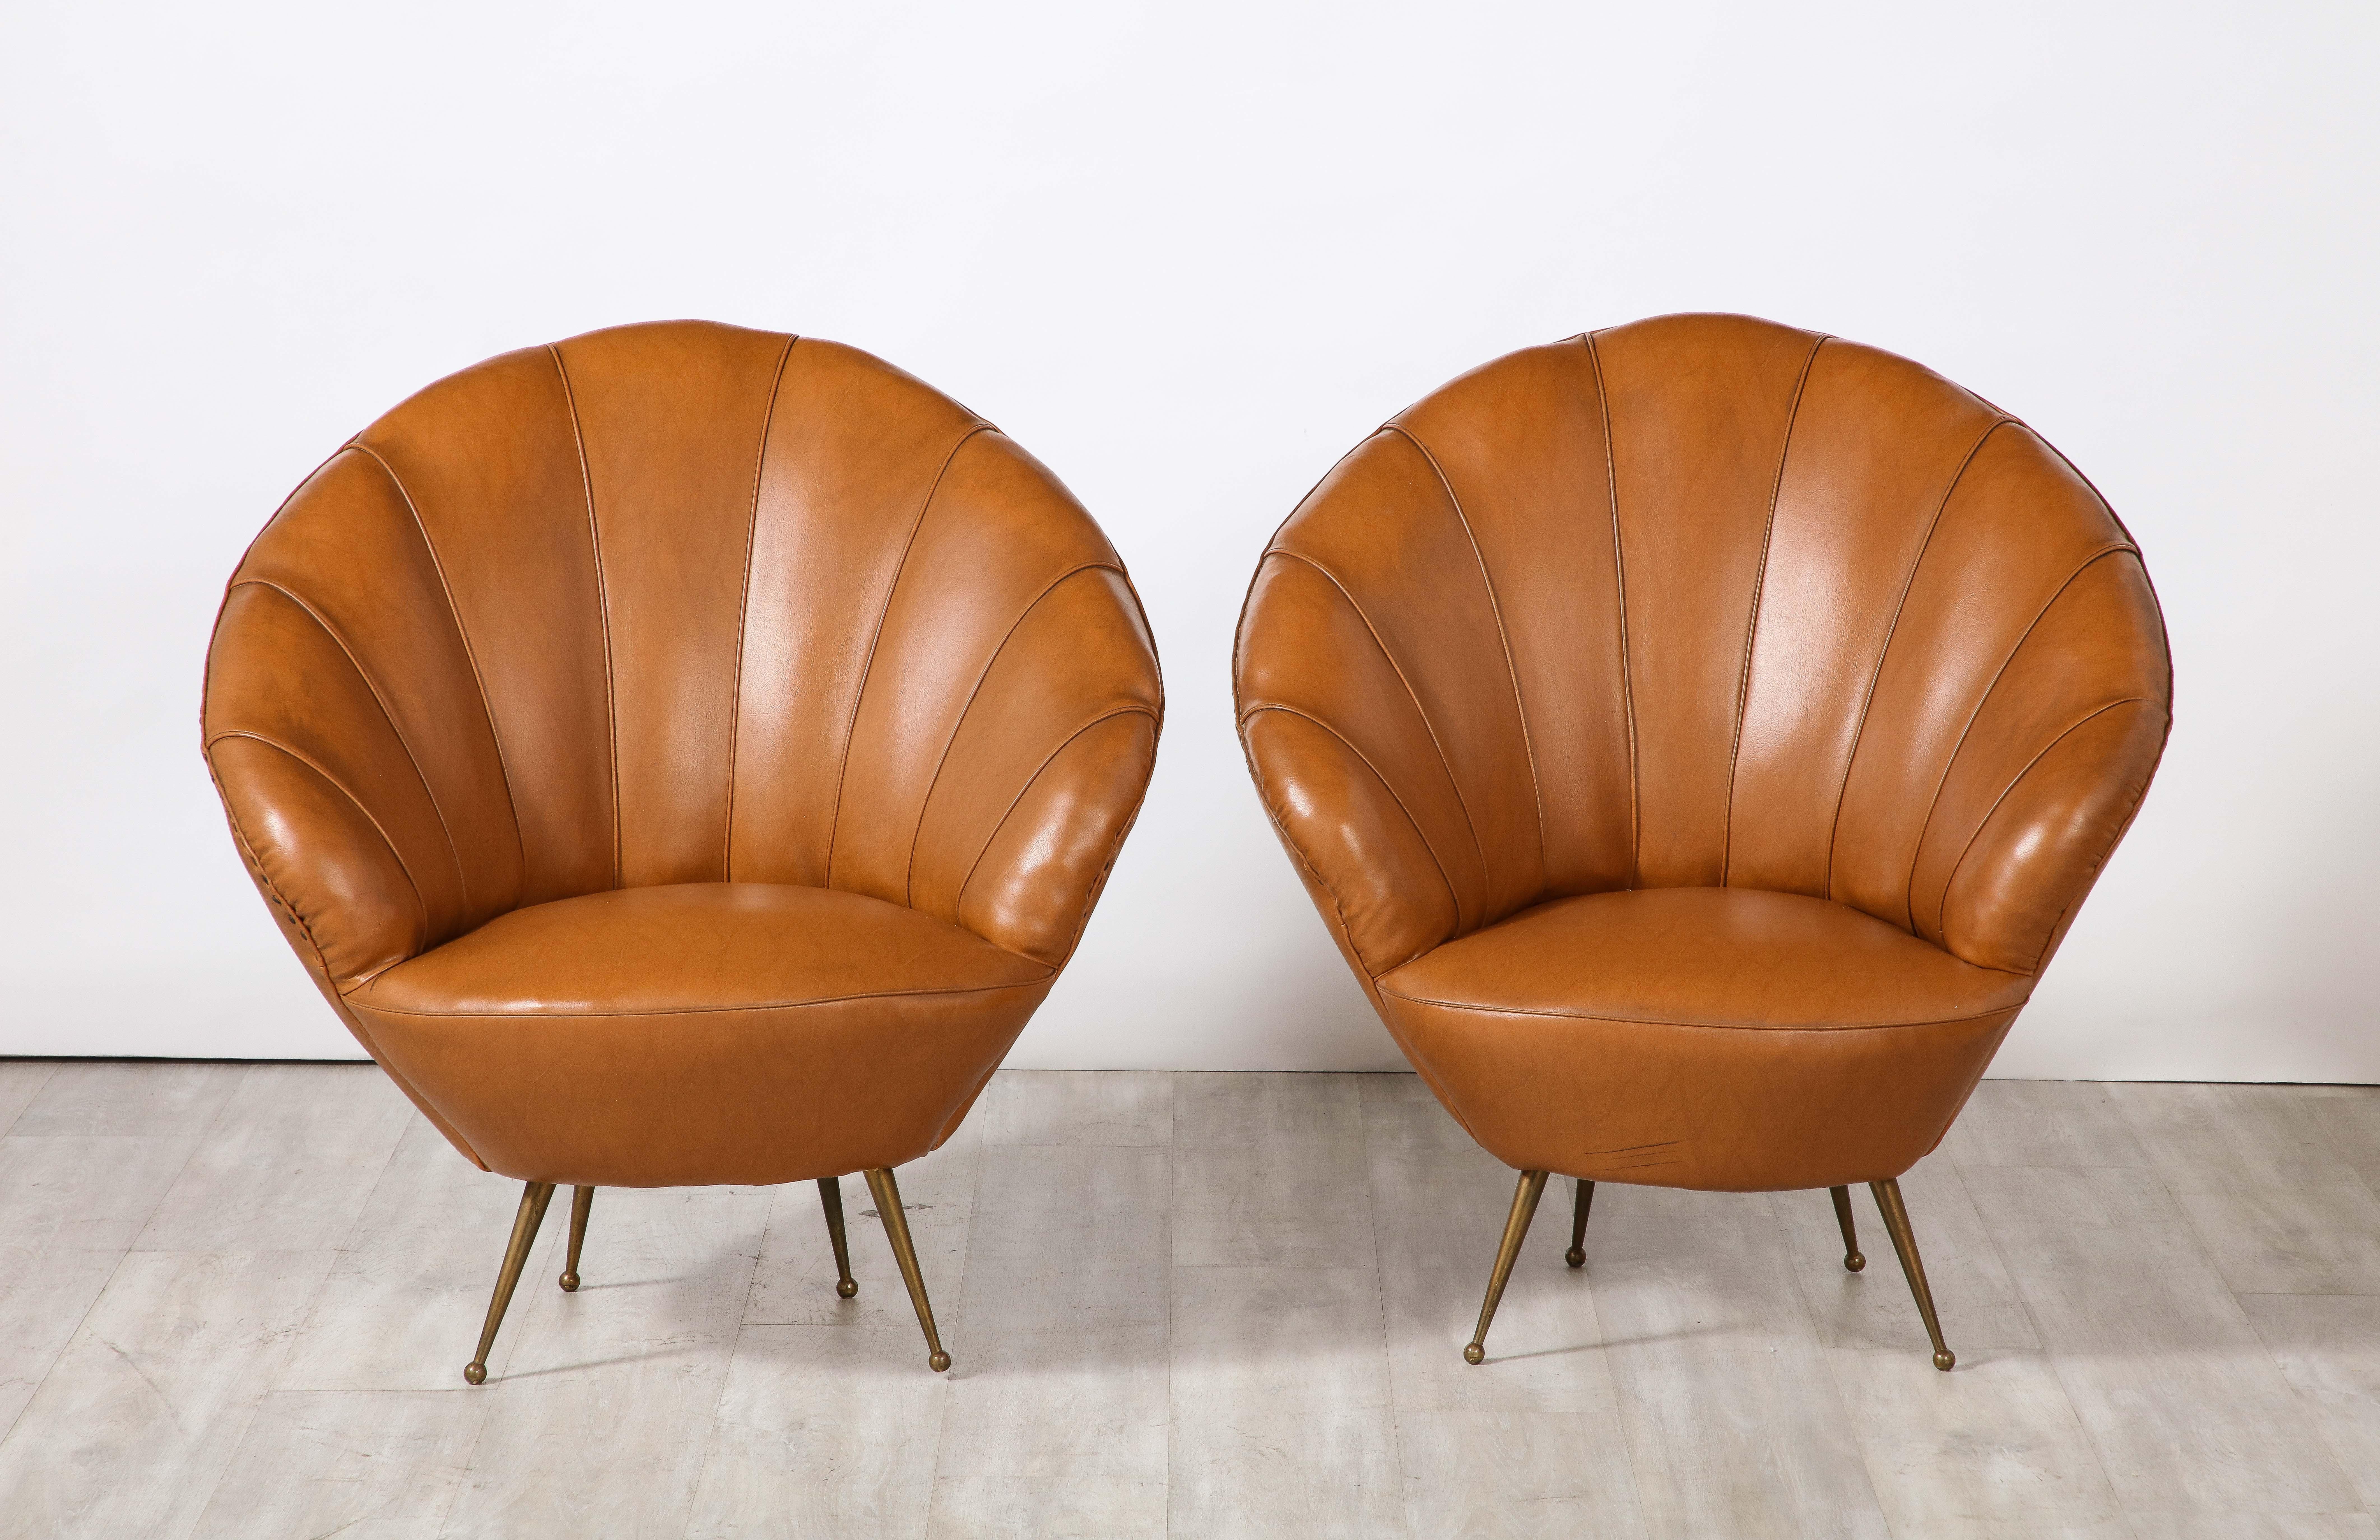 Mid-20th Century Pair of Italian Modernist Leather Scalloped Lounge Chairs, Circa 1950  For Sale